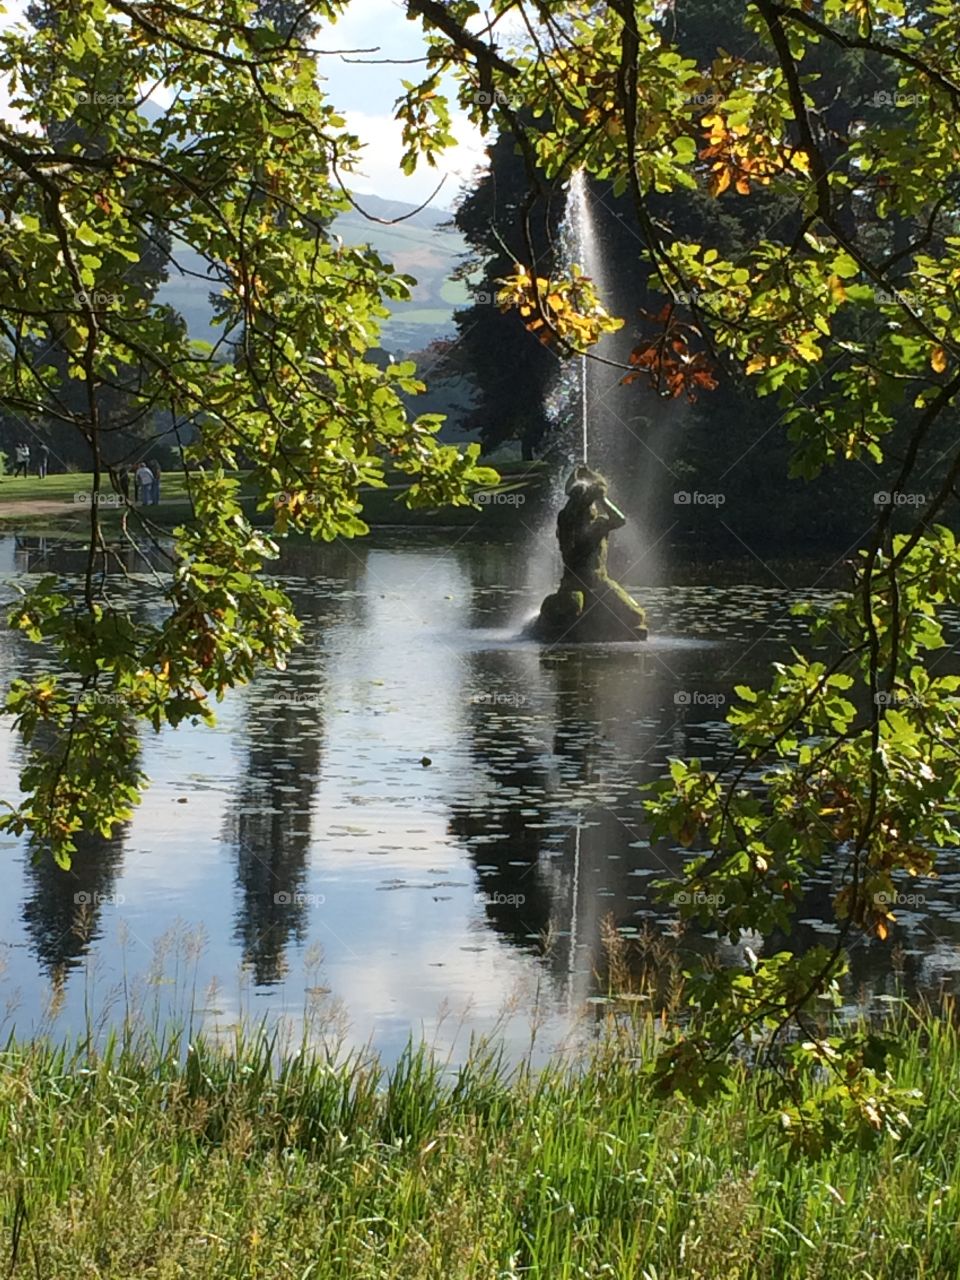 Statue in man made lake at Powerscourt in Ireland